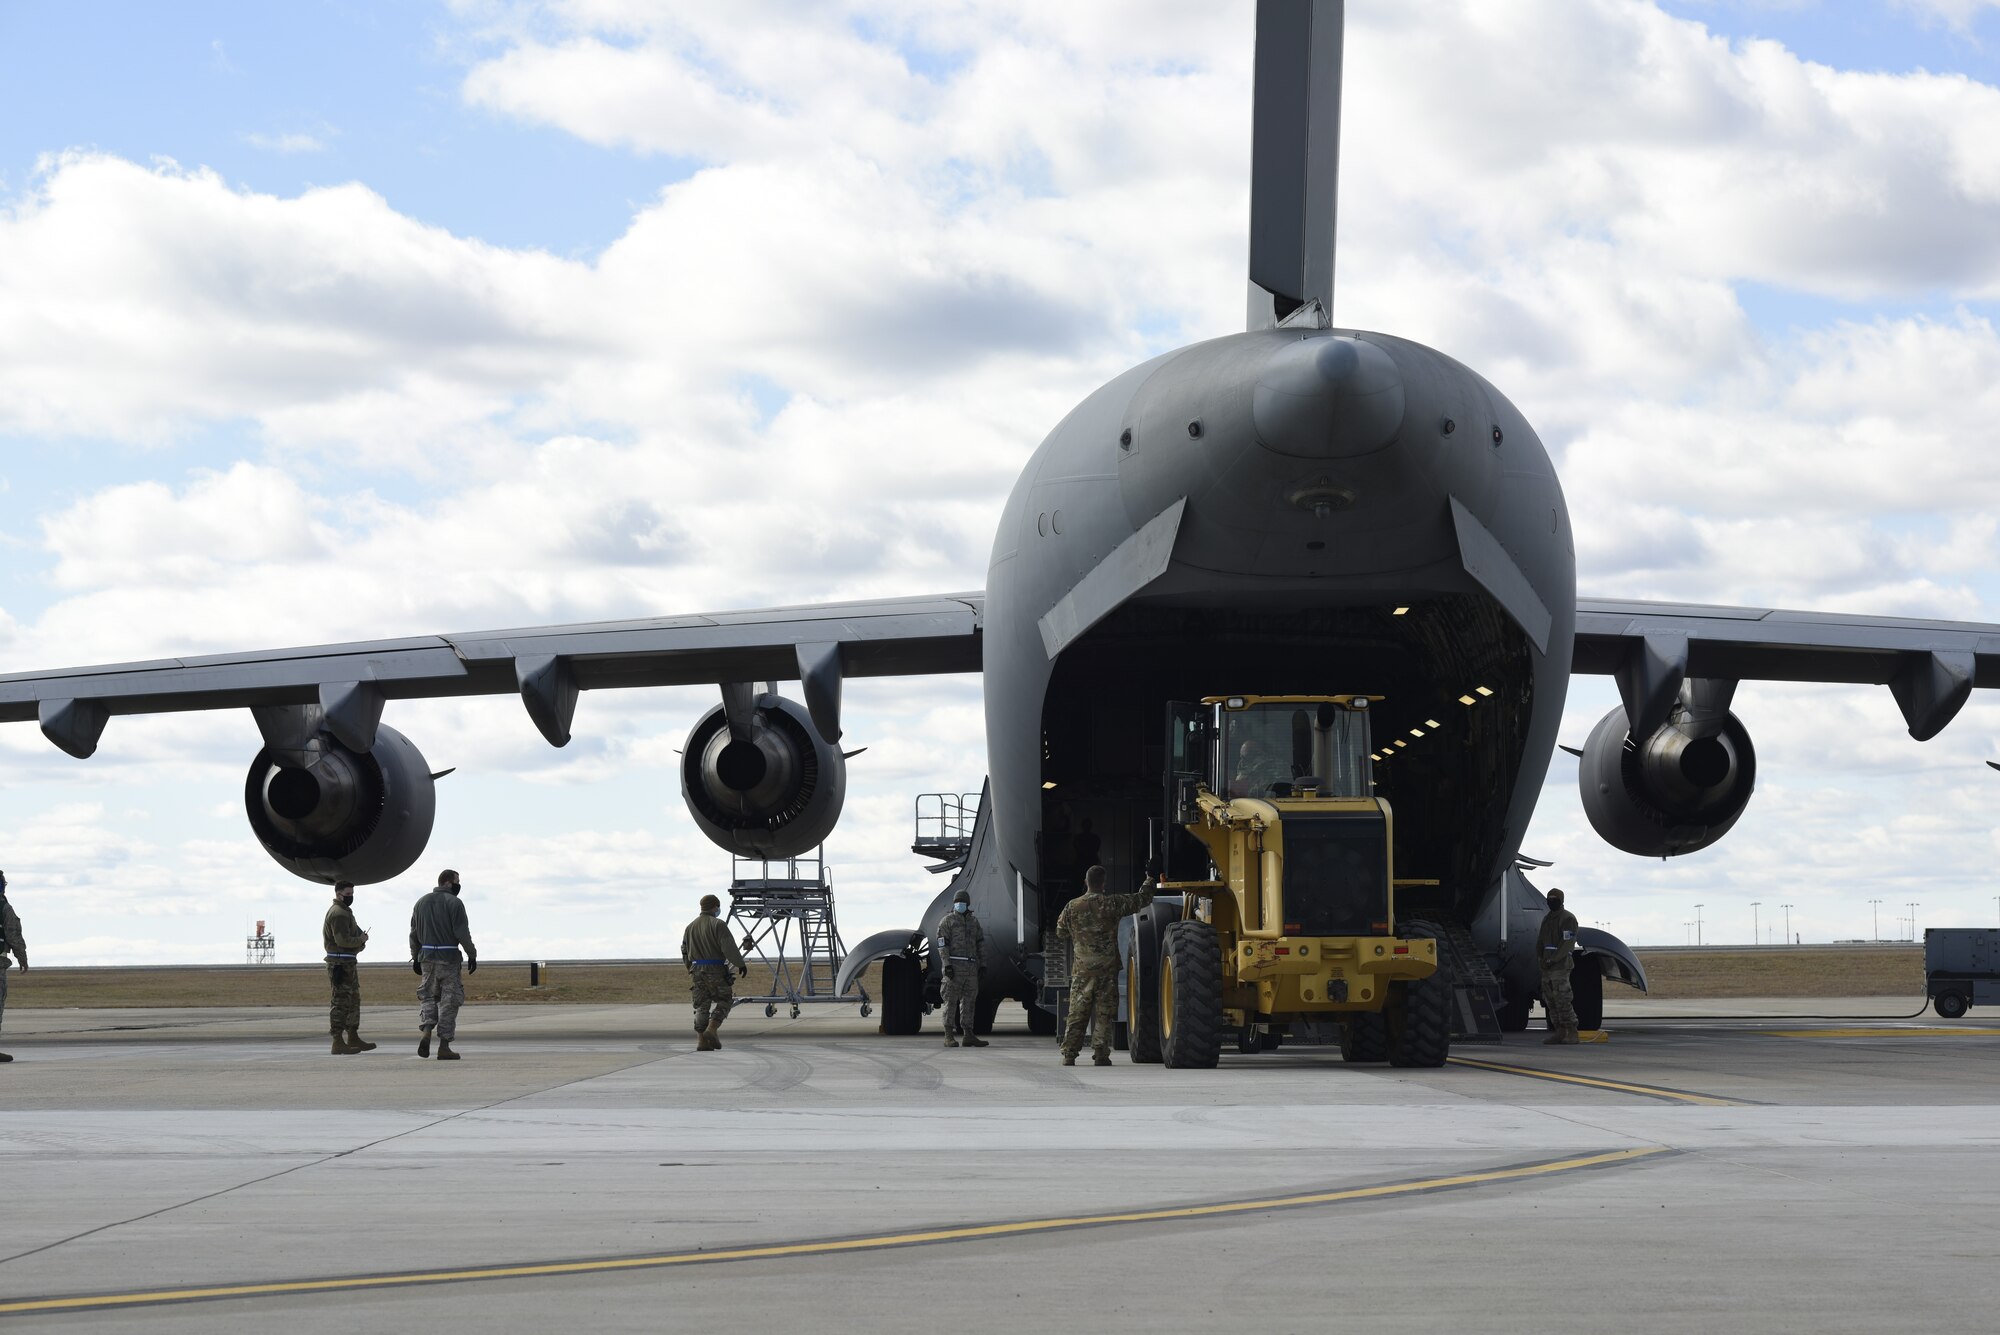 North Carolina Air National Guard members assist U.S. Air Force Air Transportation Specialist, Staff. Sgt. Jason Moore, 145th Logistics Readiness Squadron, as he loads a large item aboard a C-17 Globemaster III aircraft during a Cargo Deployment Function (CDF) exercise held at the North Carolina Air National Guard Base, Charlotte Douglas International Airport, Feb. 7, 2021. A CDF is similar to a personnel deployment line where you have a station to assemble items, check them for quality and to make sure they can safely be loaded onto an aircraft. Once the items are cleared to be loaded onto an aircraft, they reach the final phase of the CDF.